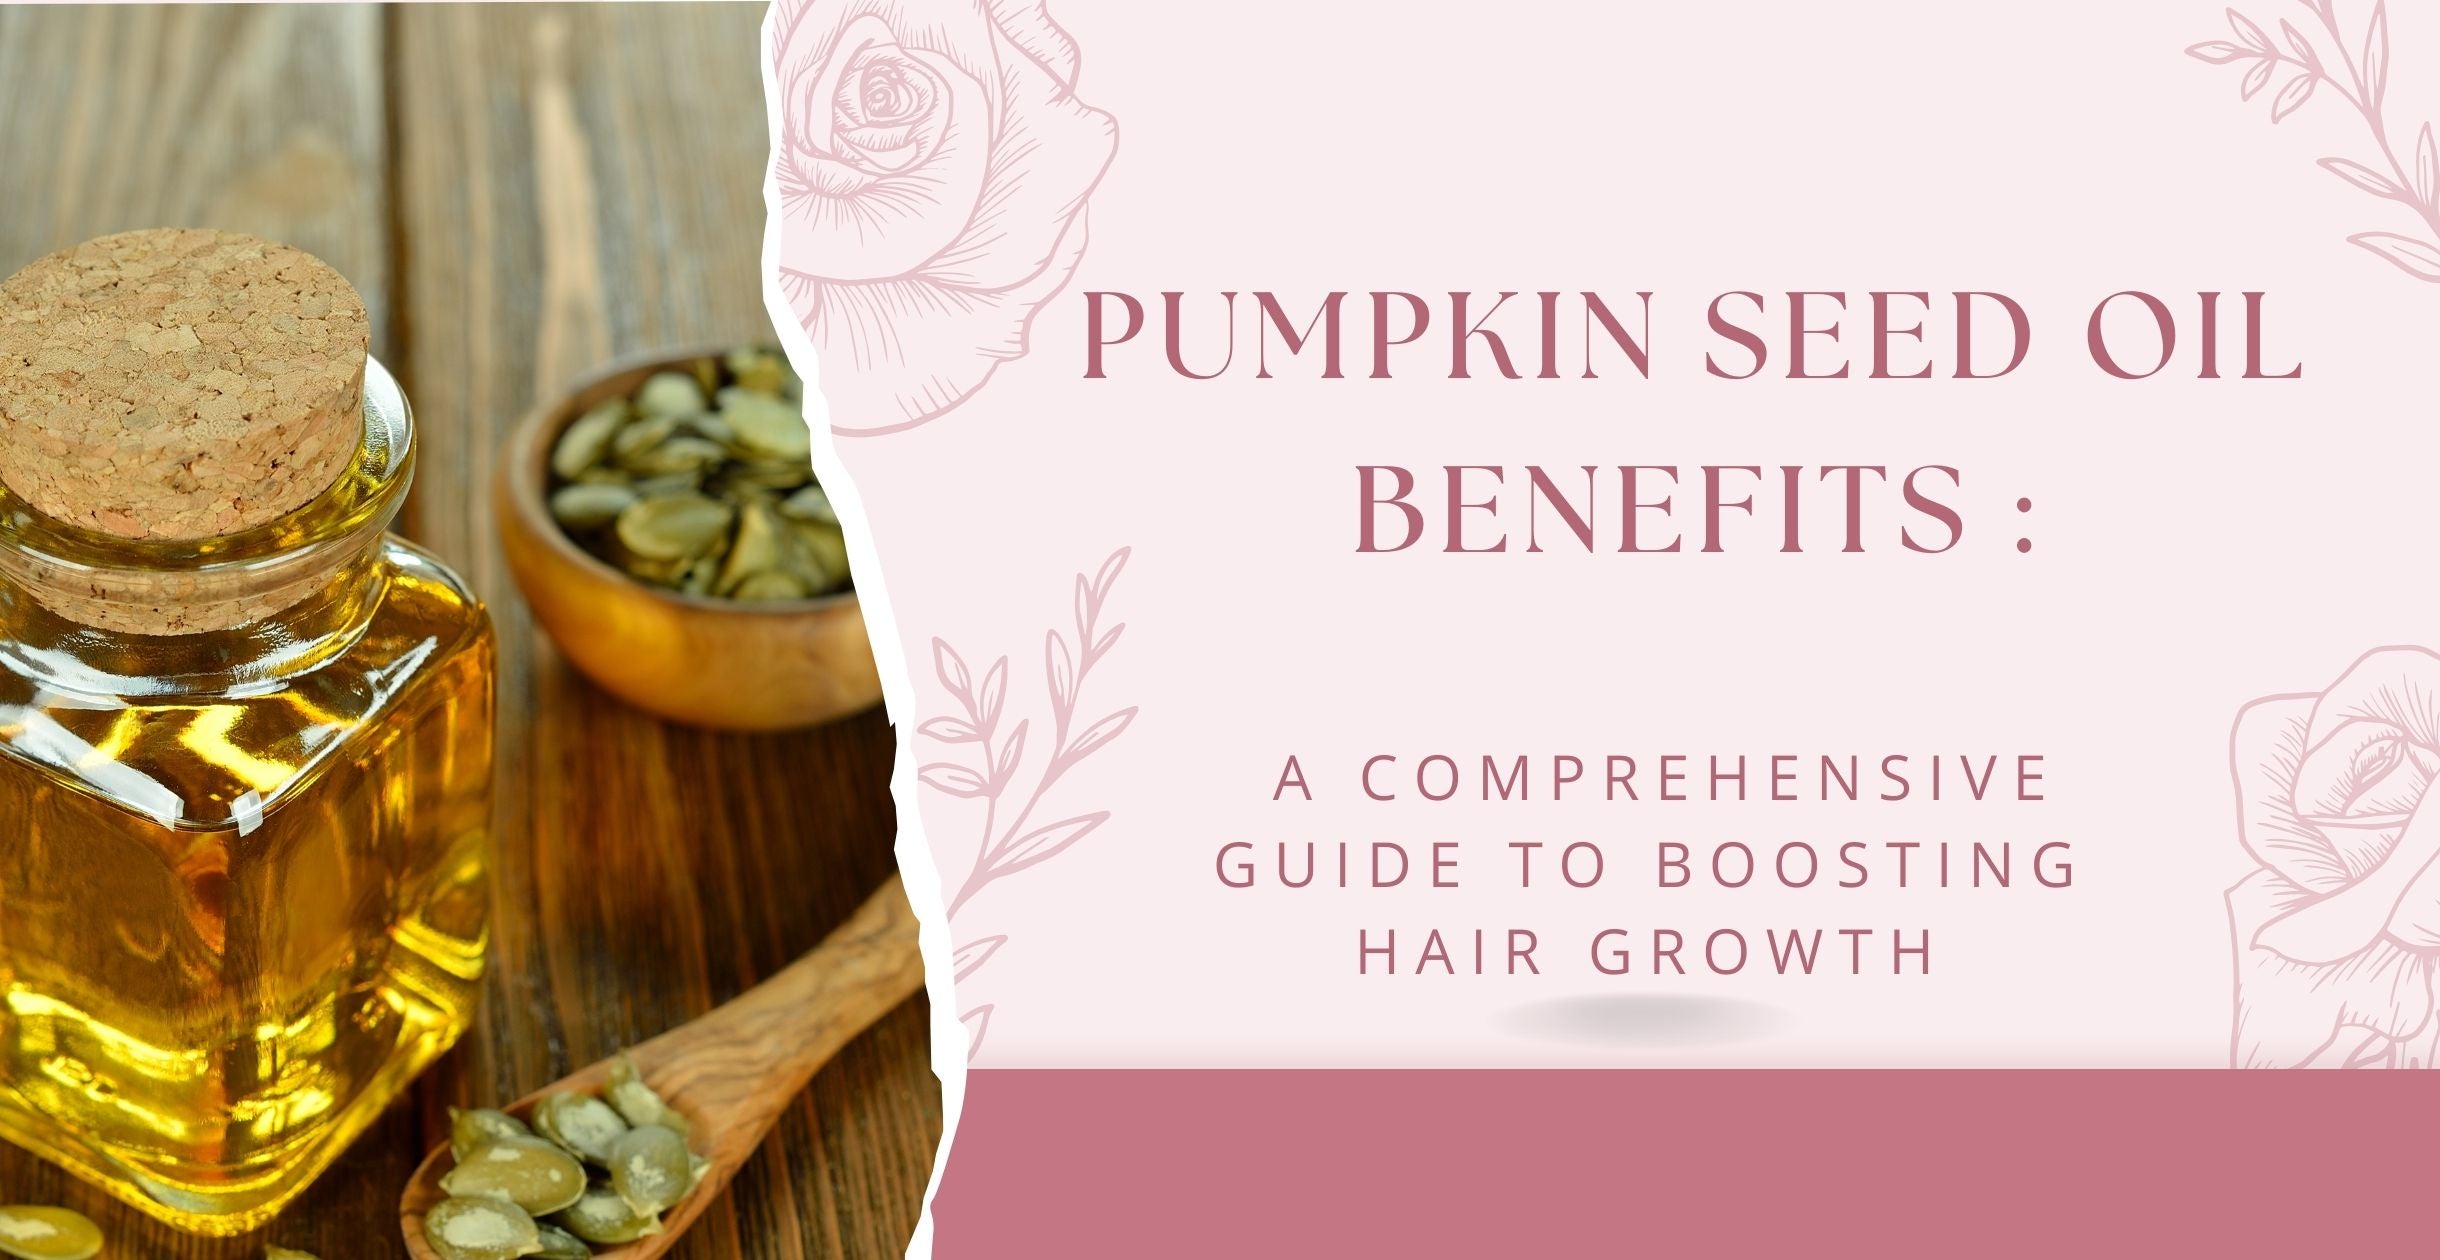 Pumpkin Seed Oil Benefits : A Comprehensive Guide to Boosting Hair Growth